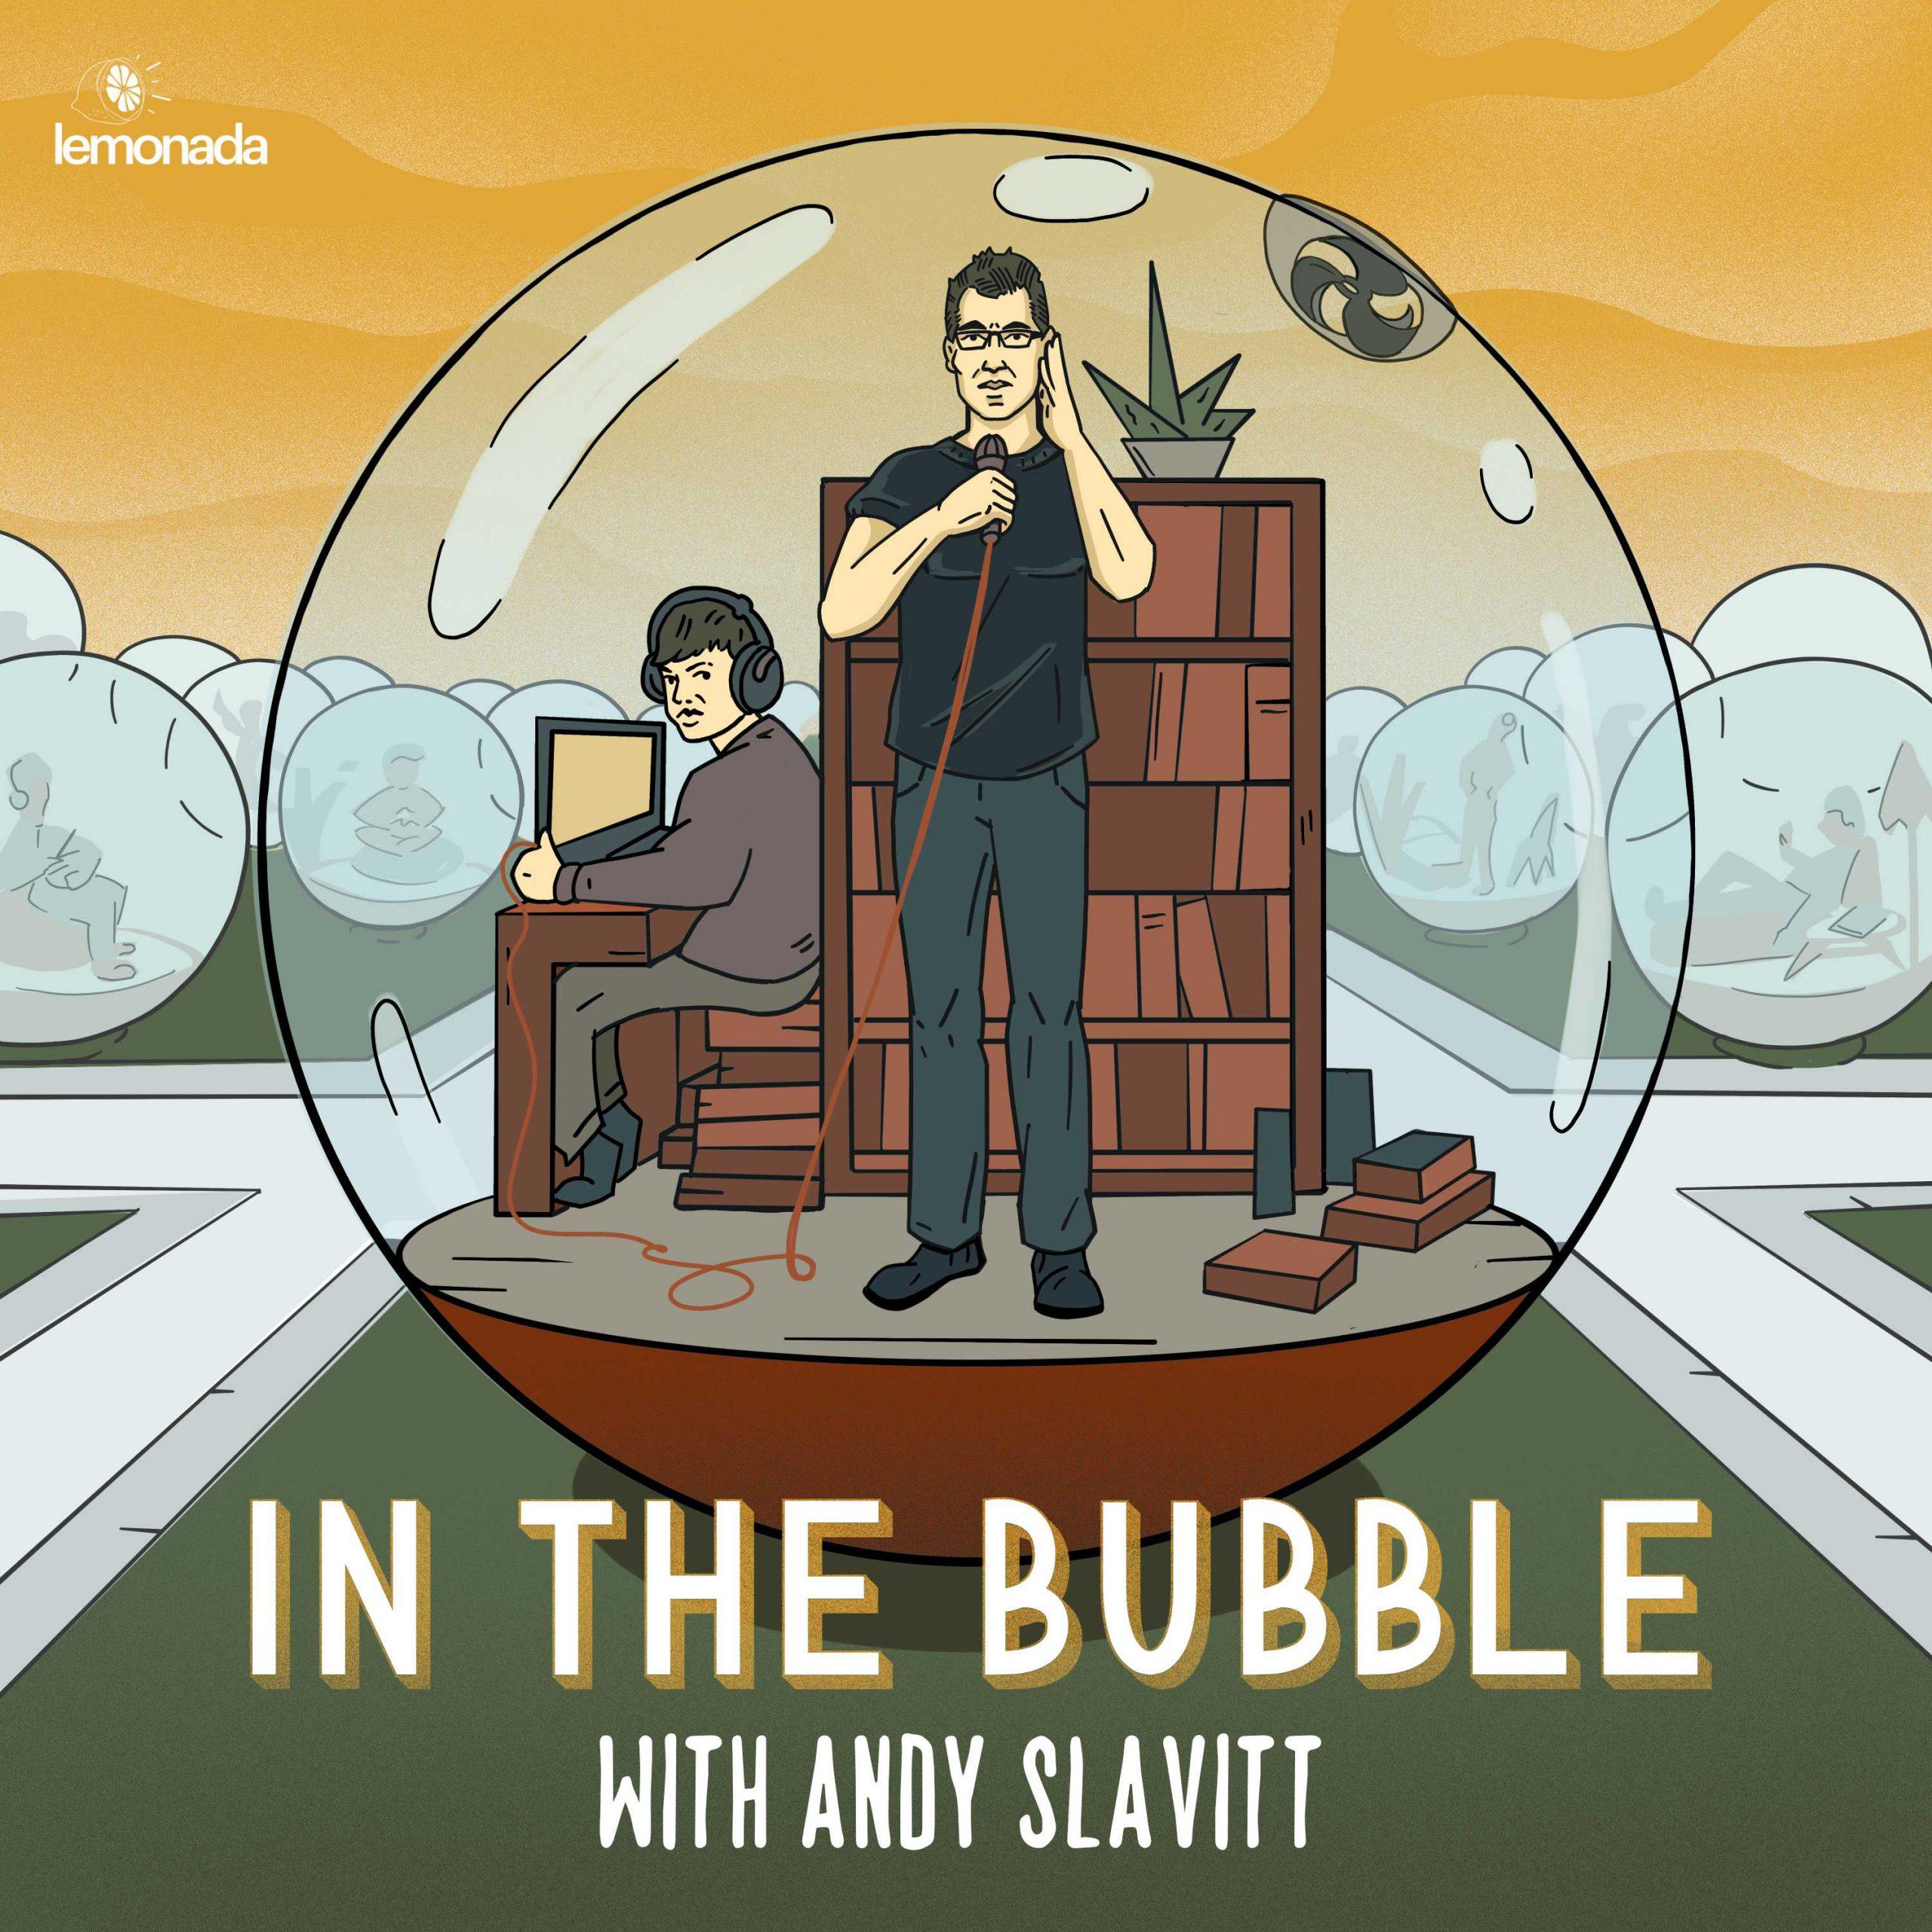 IN THE BUBBLE WITH ANDY SLAVITT,  A NEW PODCAST FROM LEMONADA MEDIA, DEBUTS APRIL 1